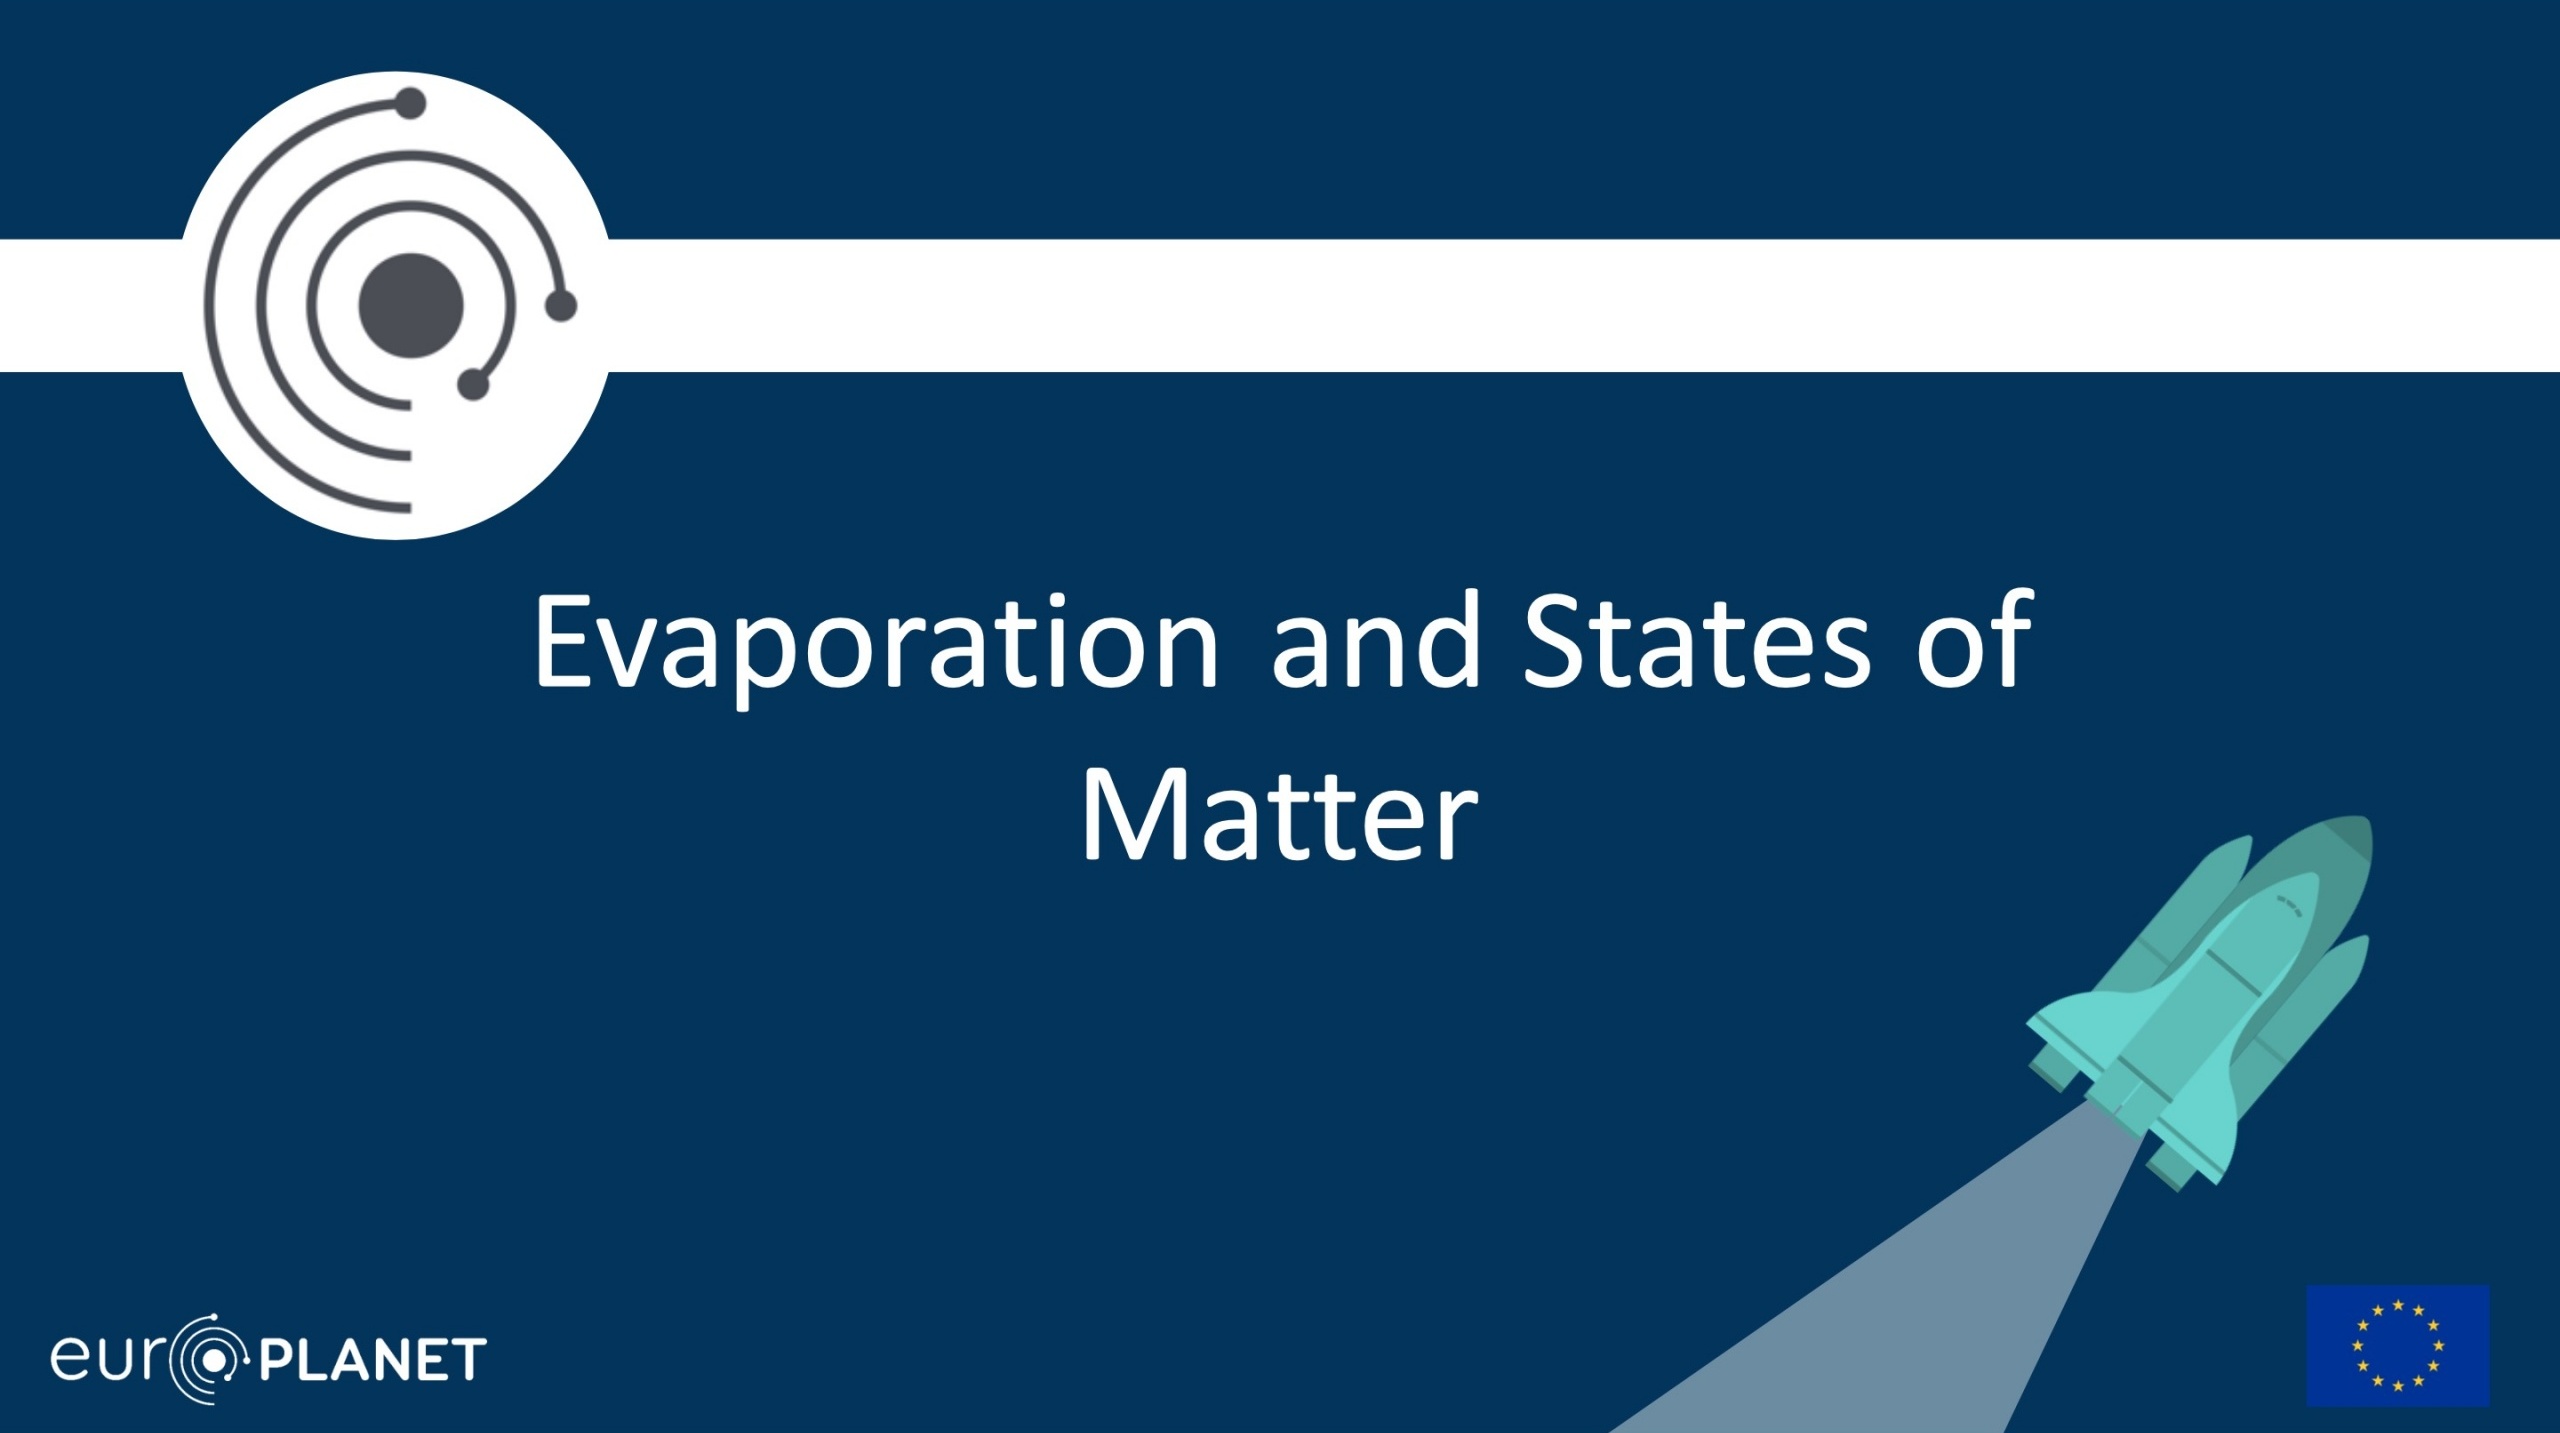 Mars Educational Resources - Evaporation and States of Matter